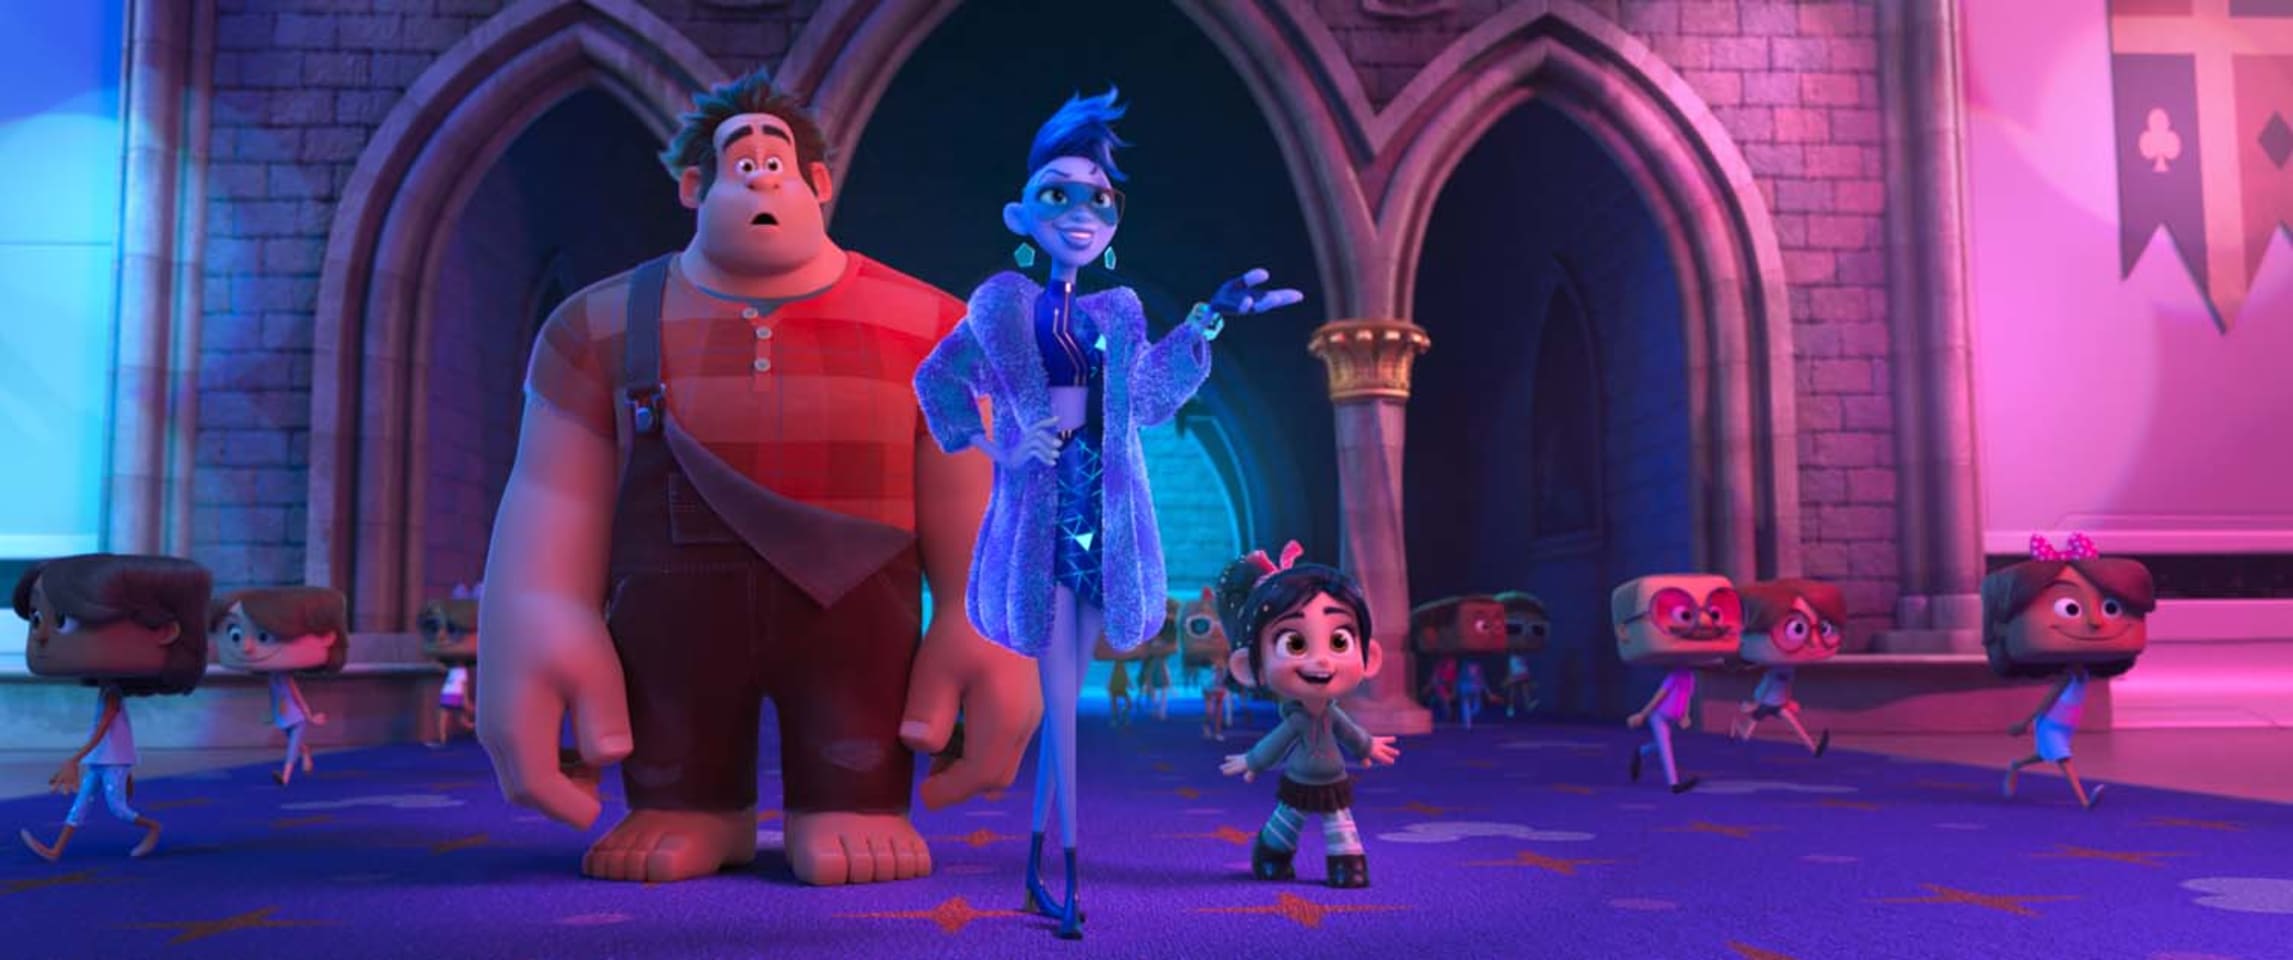 Ralph, Yesss, and Vanellope